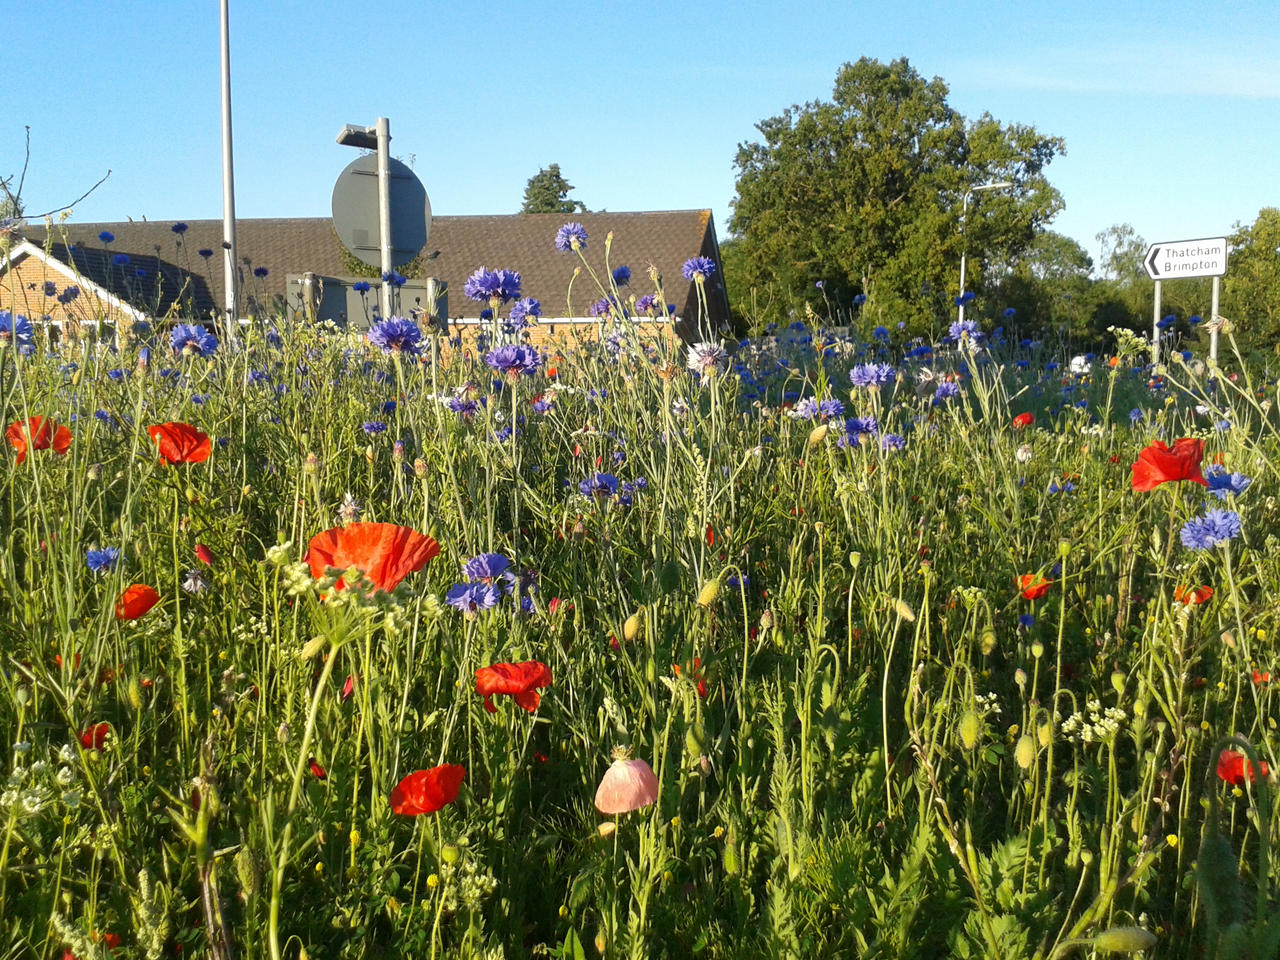 The wildflower roundabout